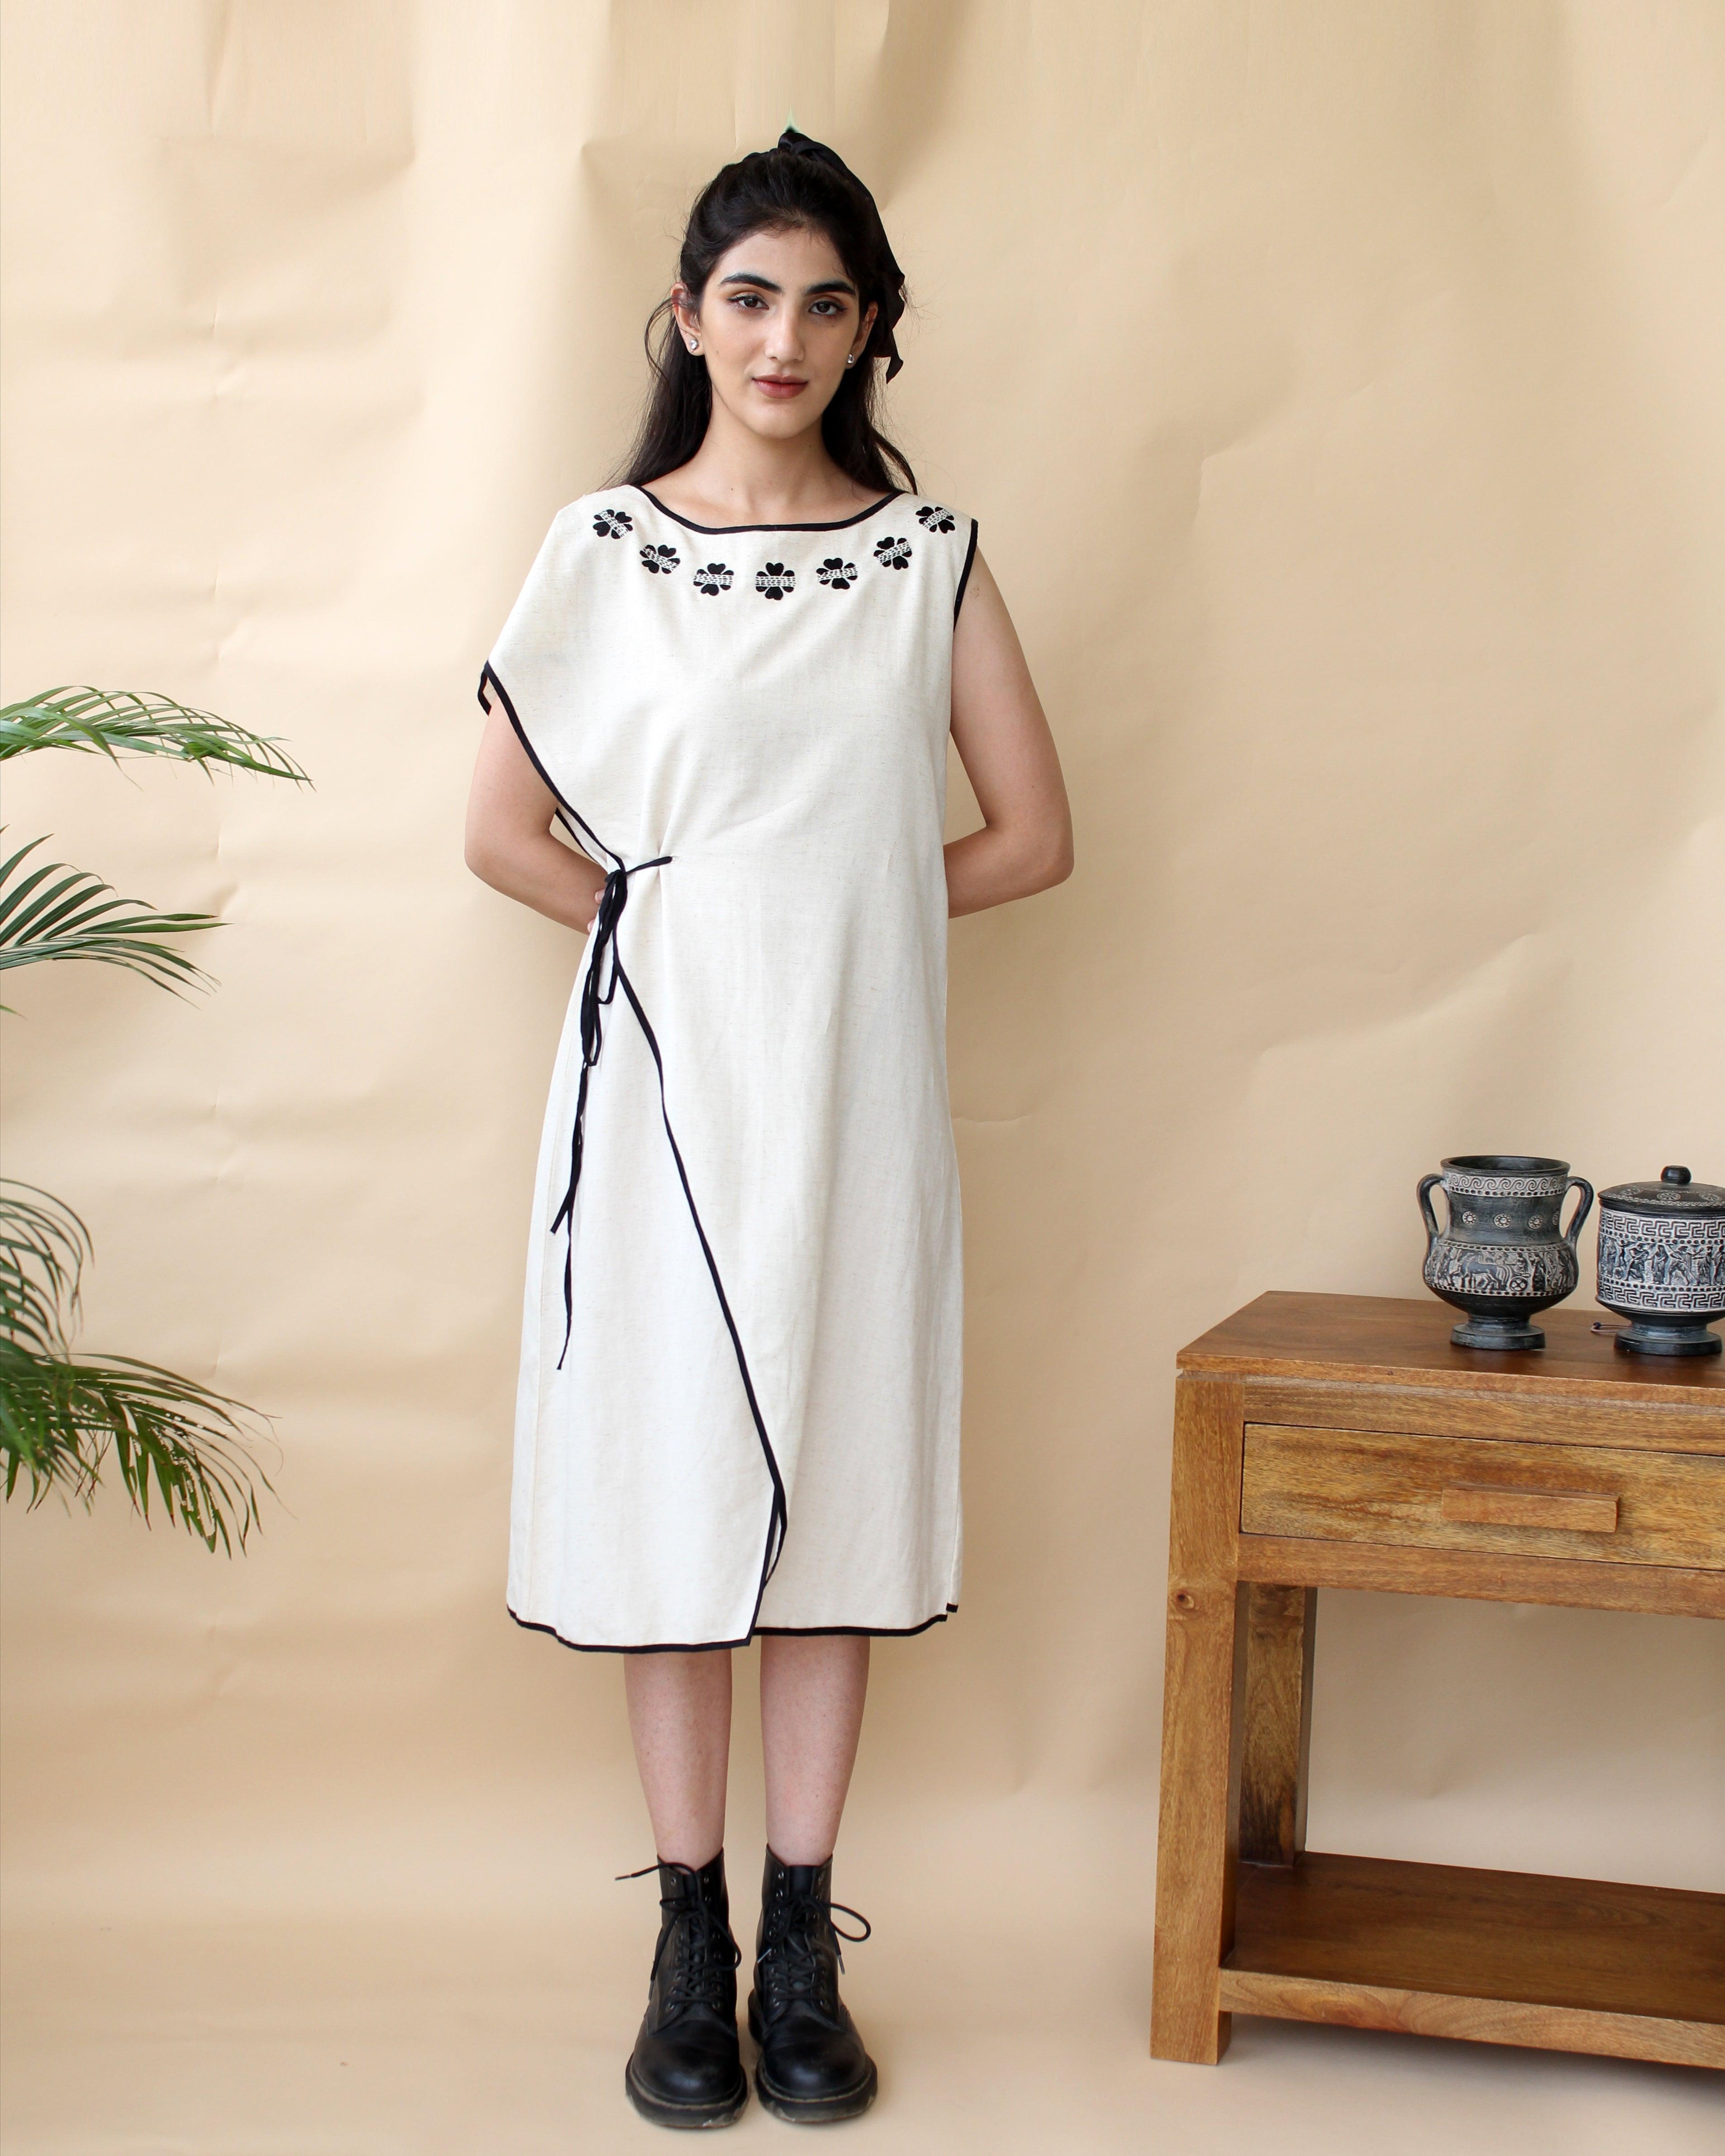 Ivory and black tie up dress with flower motifs - Sohni